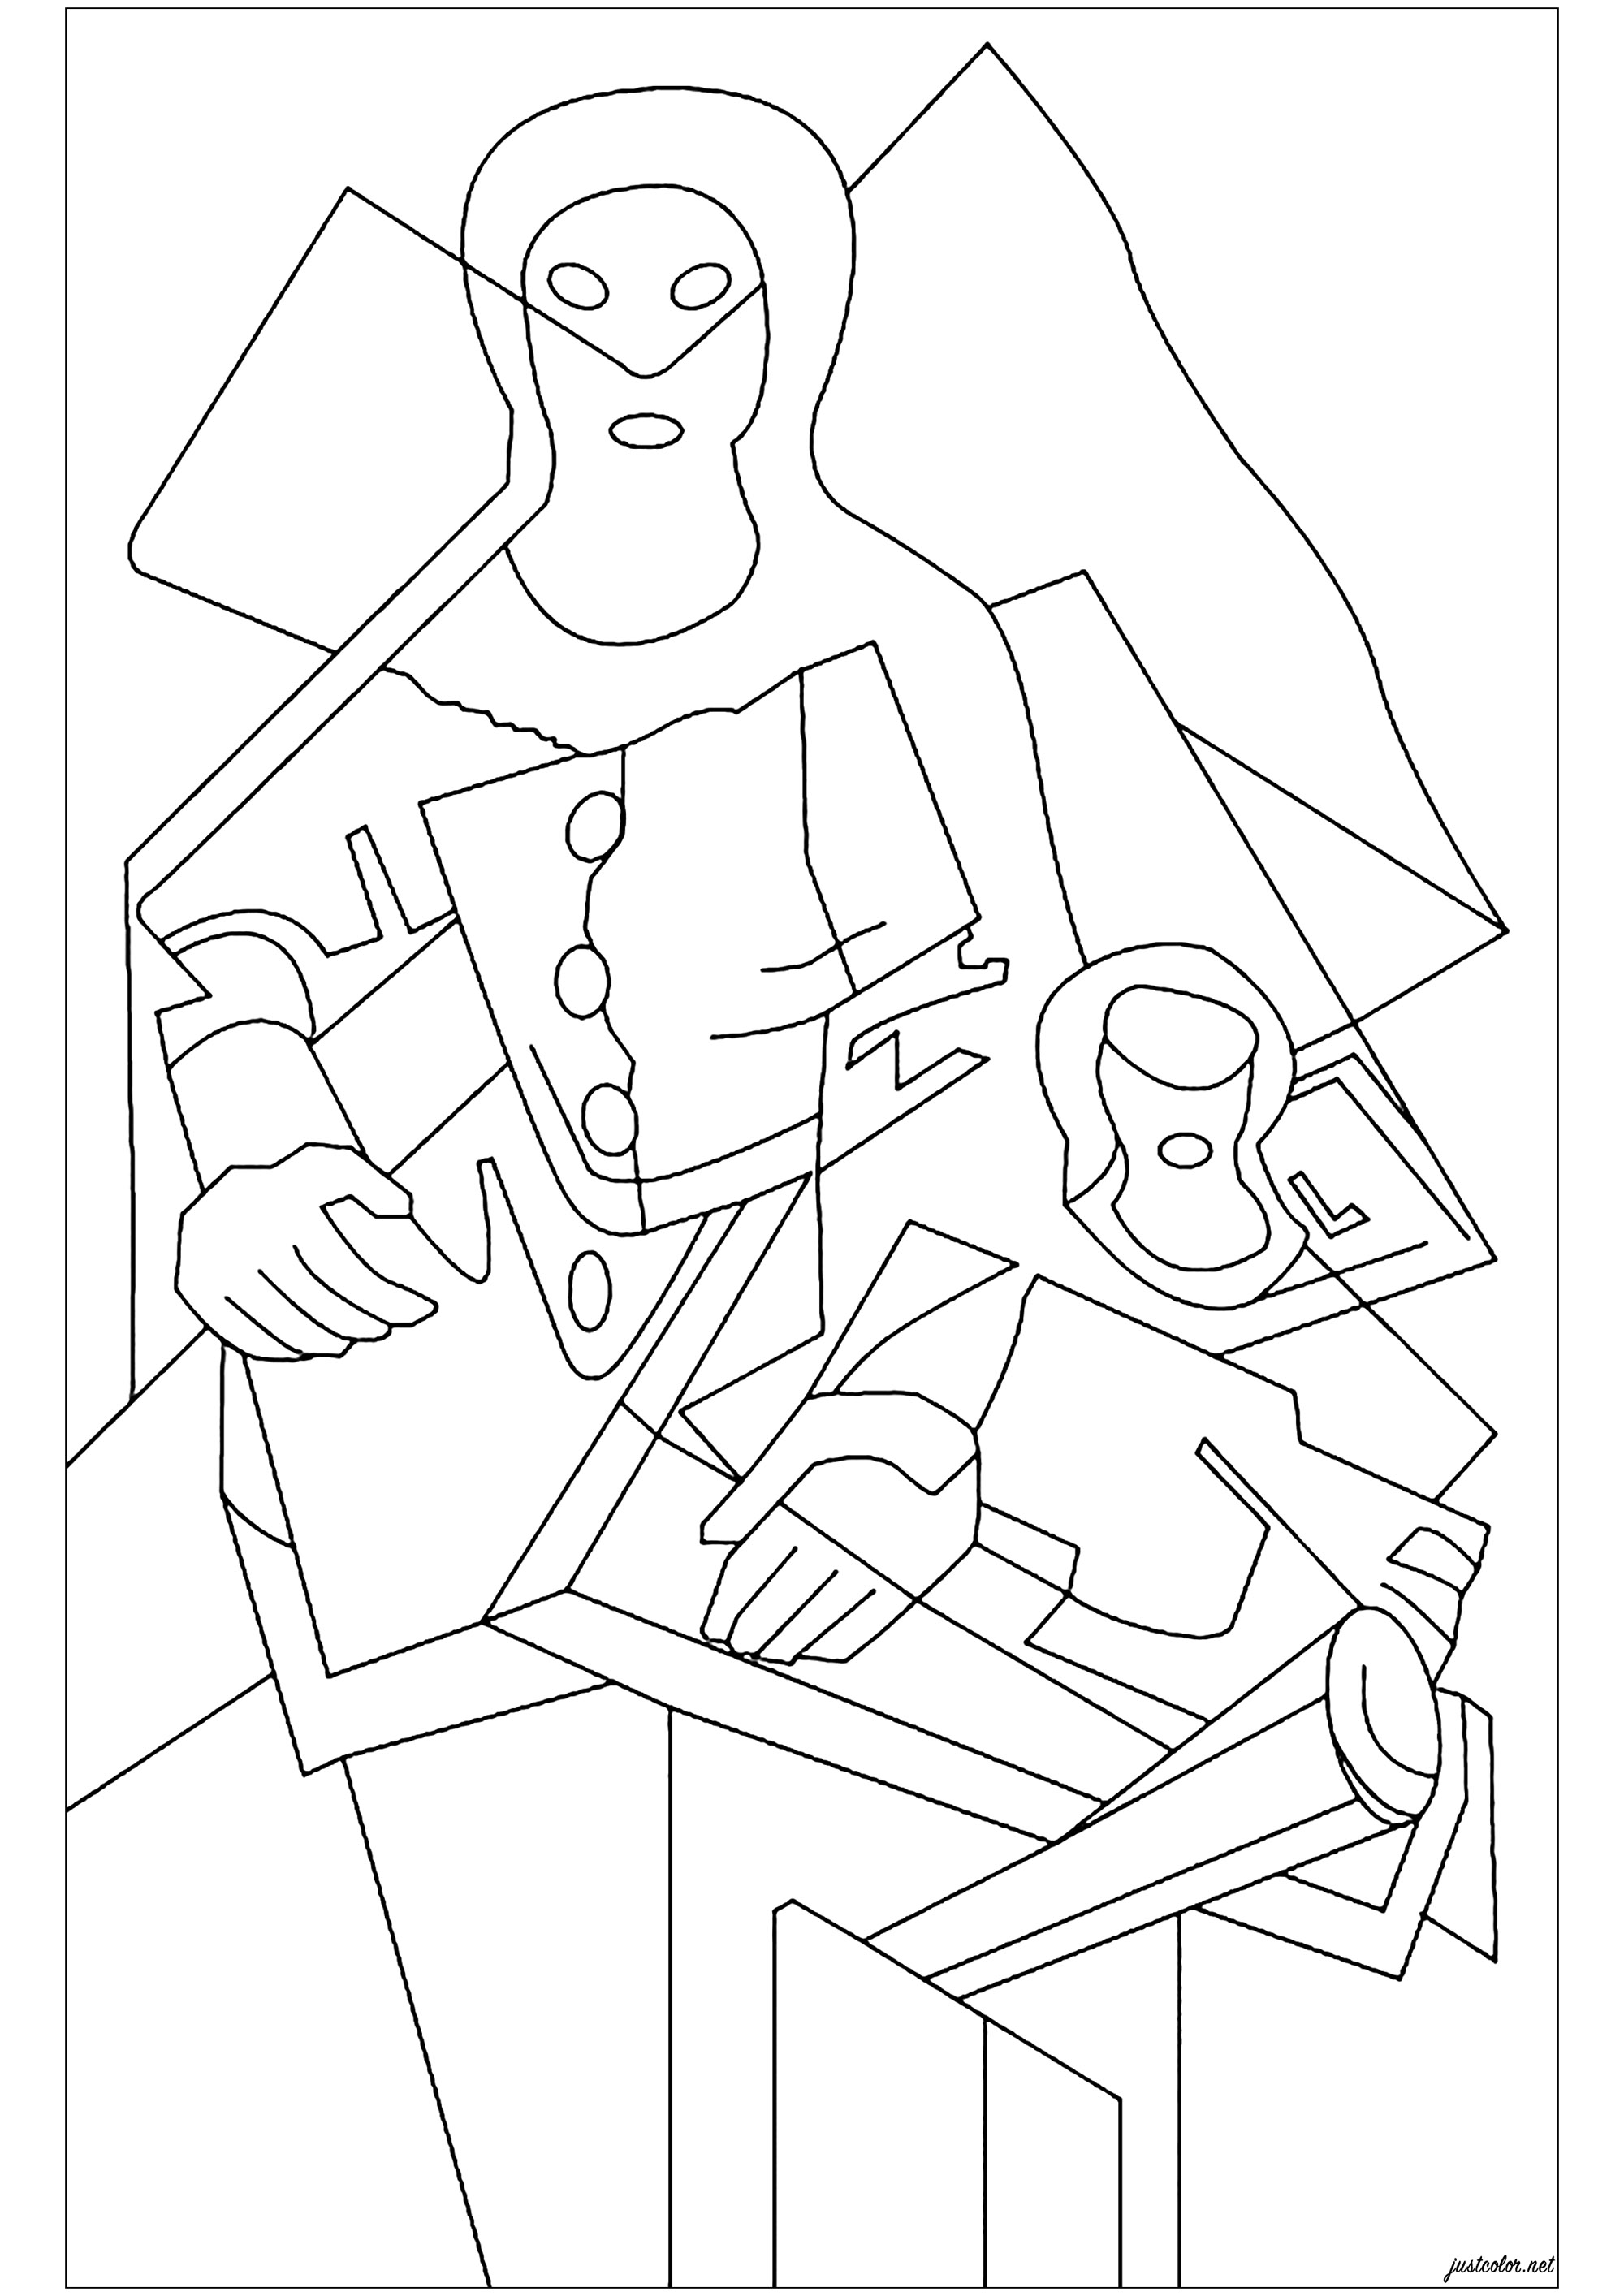 Coloring based on 'Pierrot' by Juan Gris (1921). Juan Gris (1887- 1927) was one of the pioneers of the Cubist movement. From 1902 to 1904, he studied mechanical drawing at the Escuela de Artes y Manufacturas in Madrid, during which time he produced drawings for local periodicals. In 1904, he began studying painting with the artist Jose Maria Carbonero. After moving to Paris in 1906, he befriended Pablo Picasso and Georges Braque, Artist : Théo D